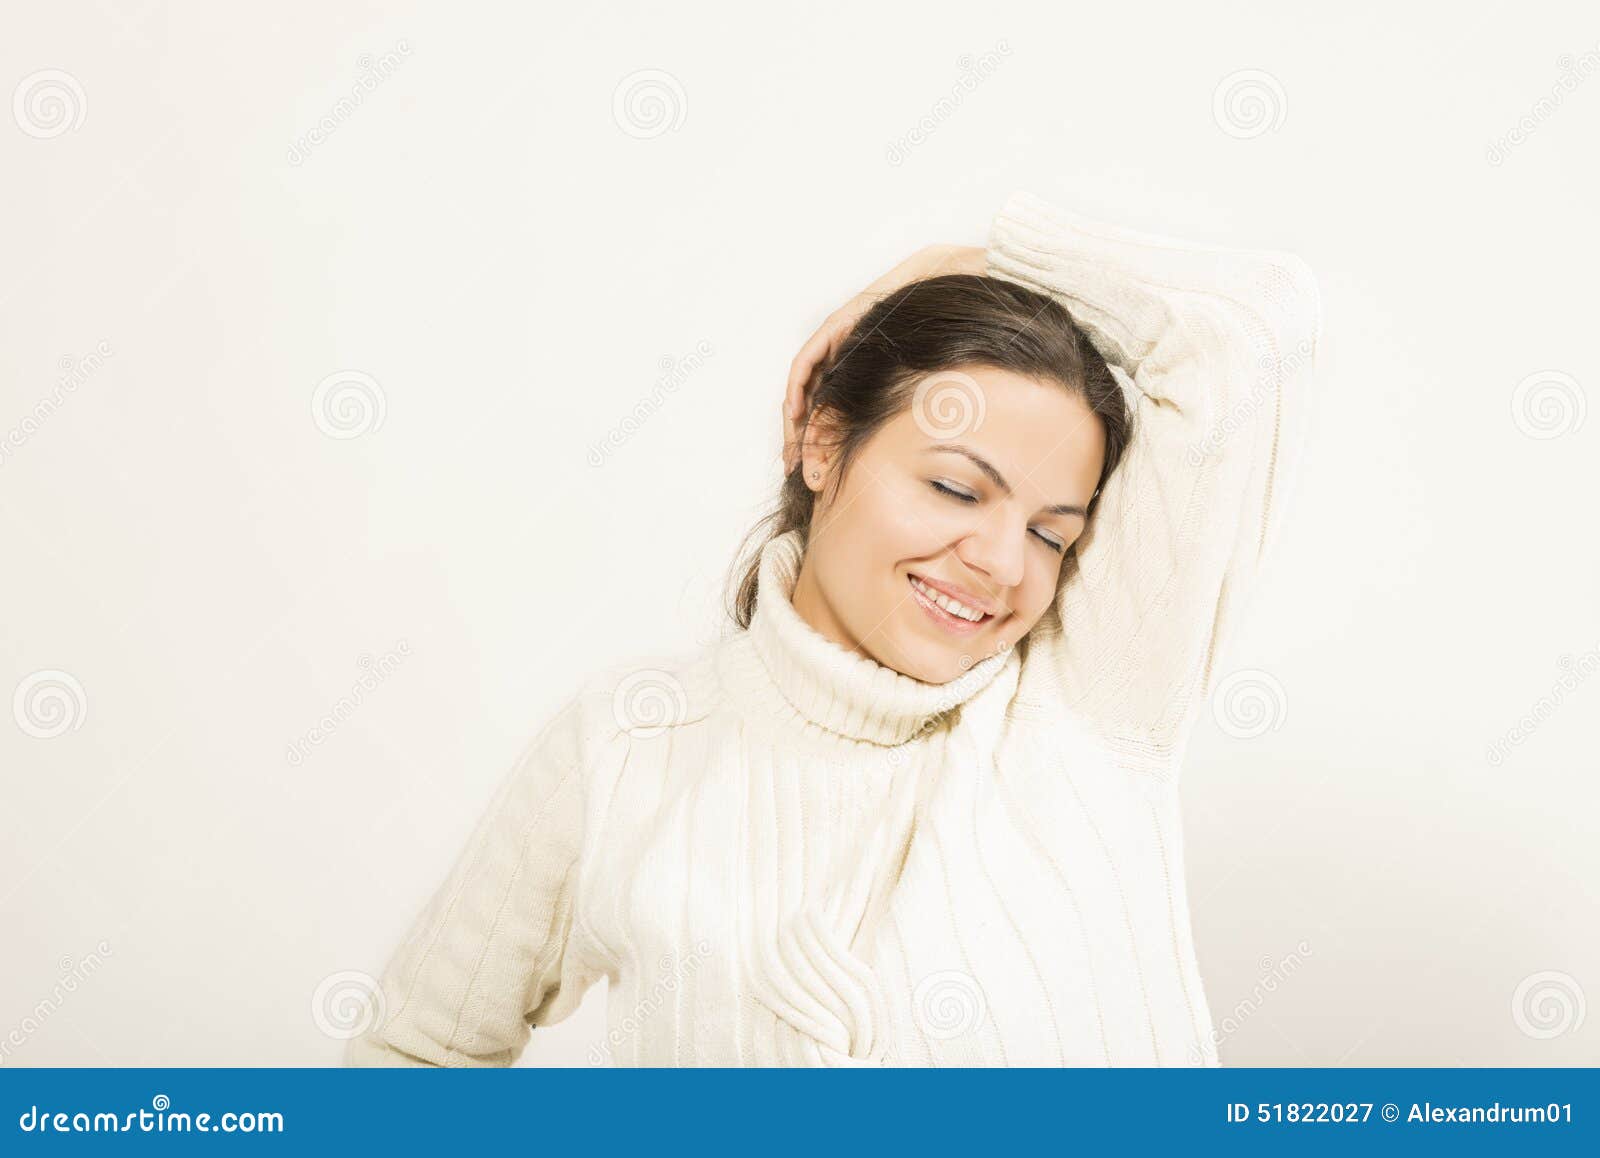 Winter Woman. stock image. Image of fashion, expressing - 51822027